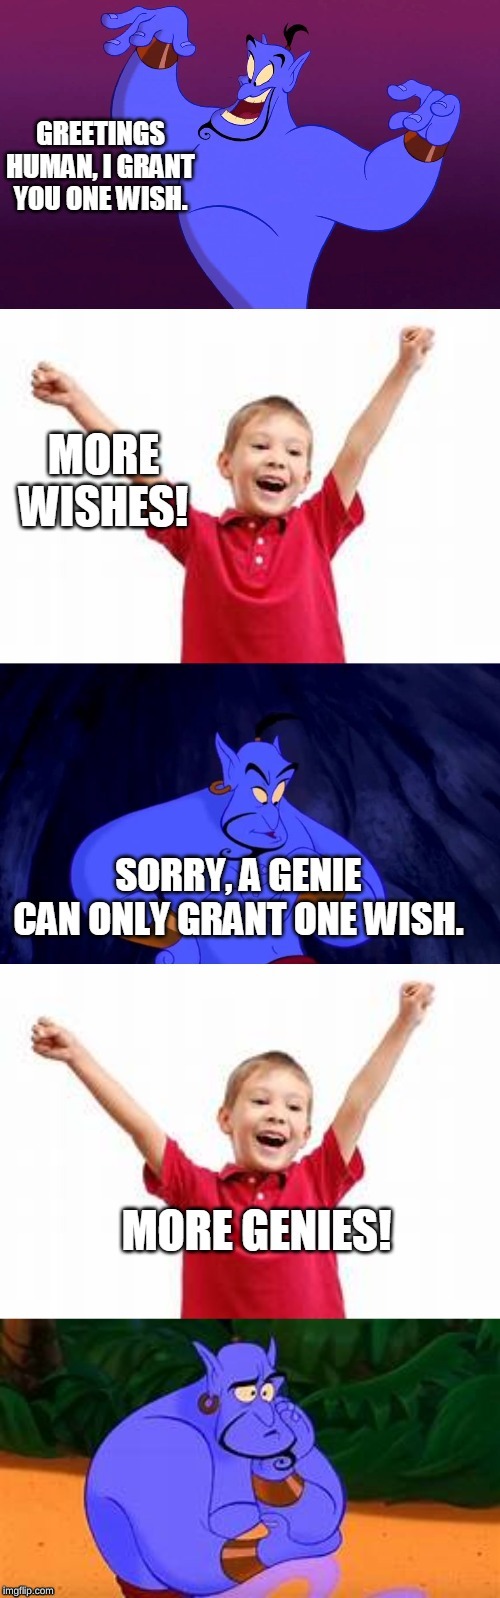 image tagged in genie wishes | made w/ Imgflip meme maker